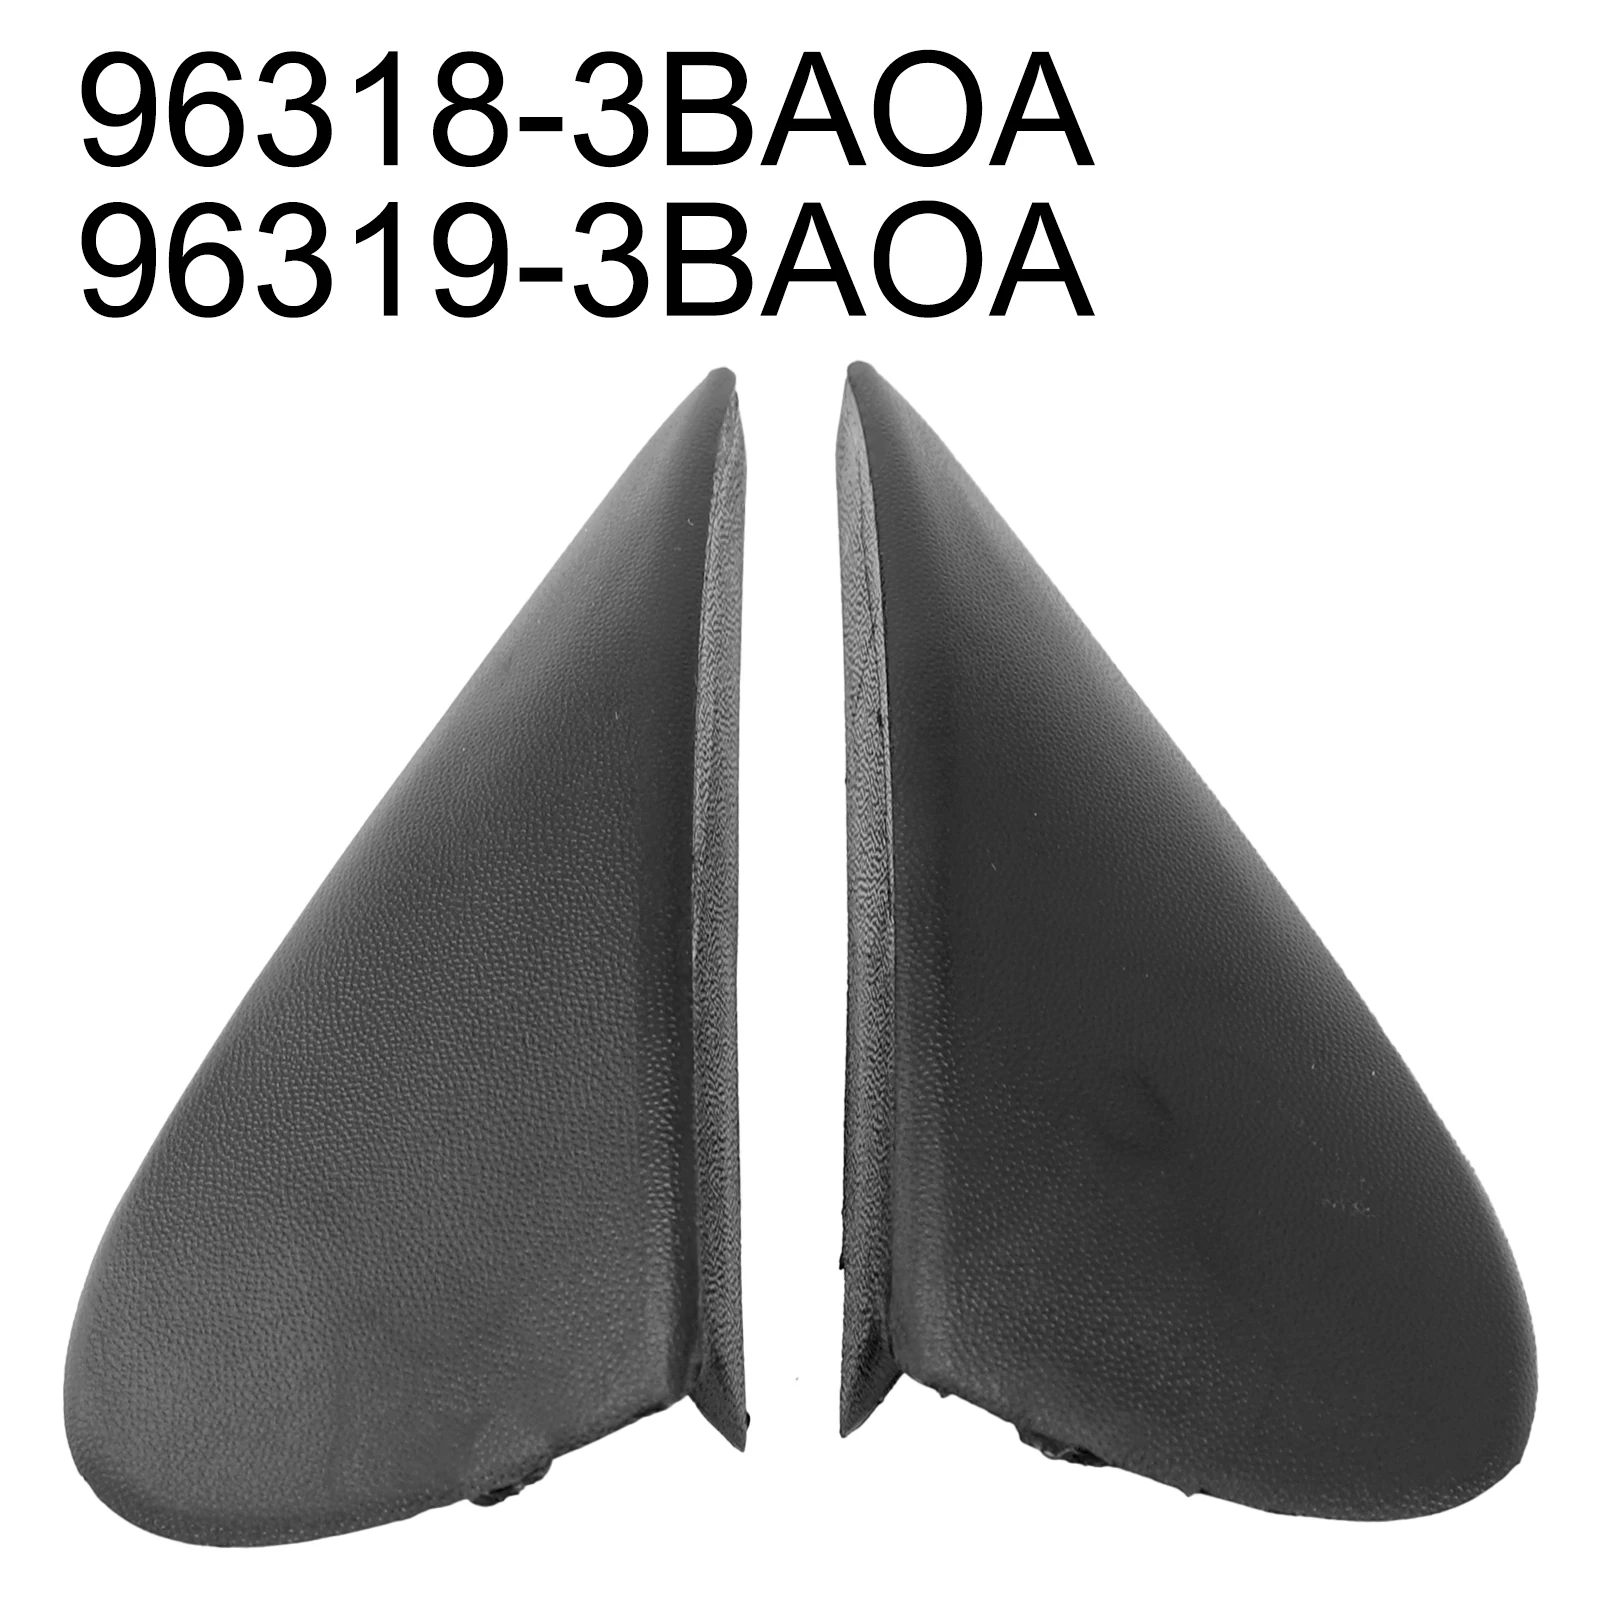 

Reliable Performance Car Side Mirror Corner Triangle Fender Cover Trim for Nissan Versa 2012 2019 Trust in Long Lasting Quality